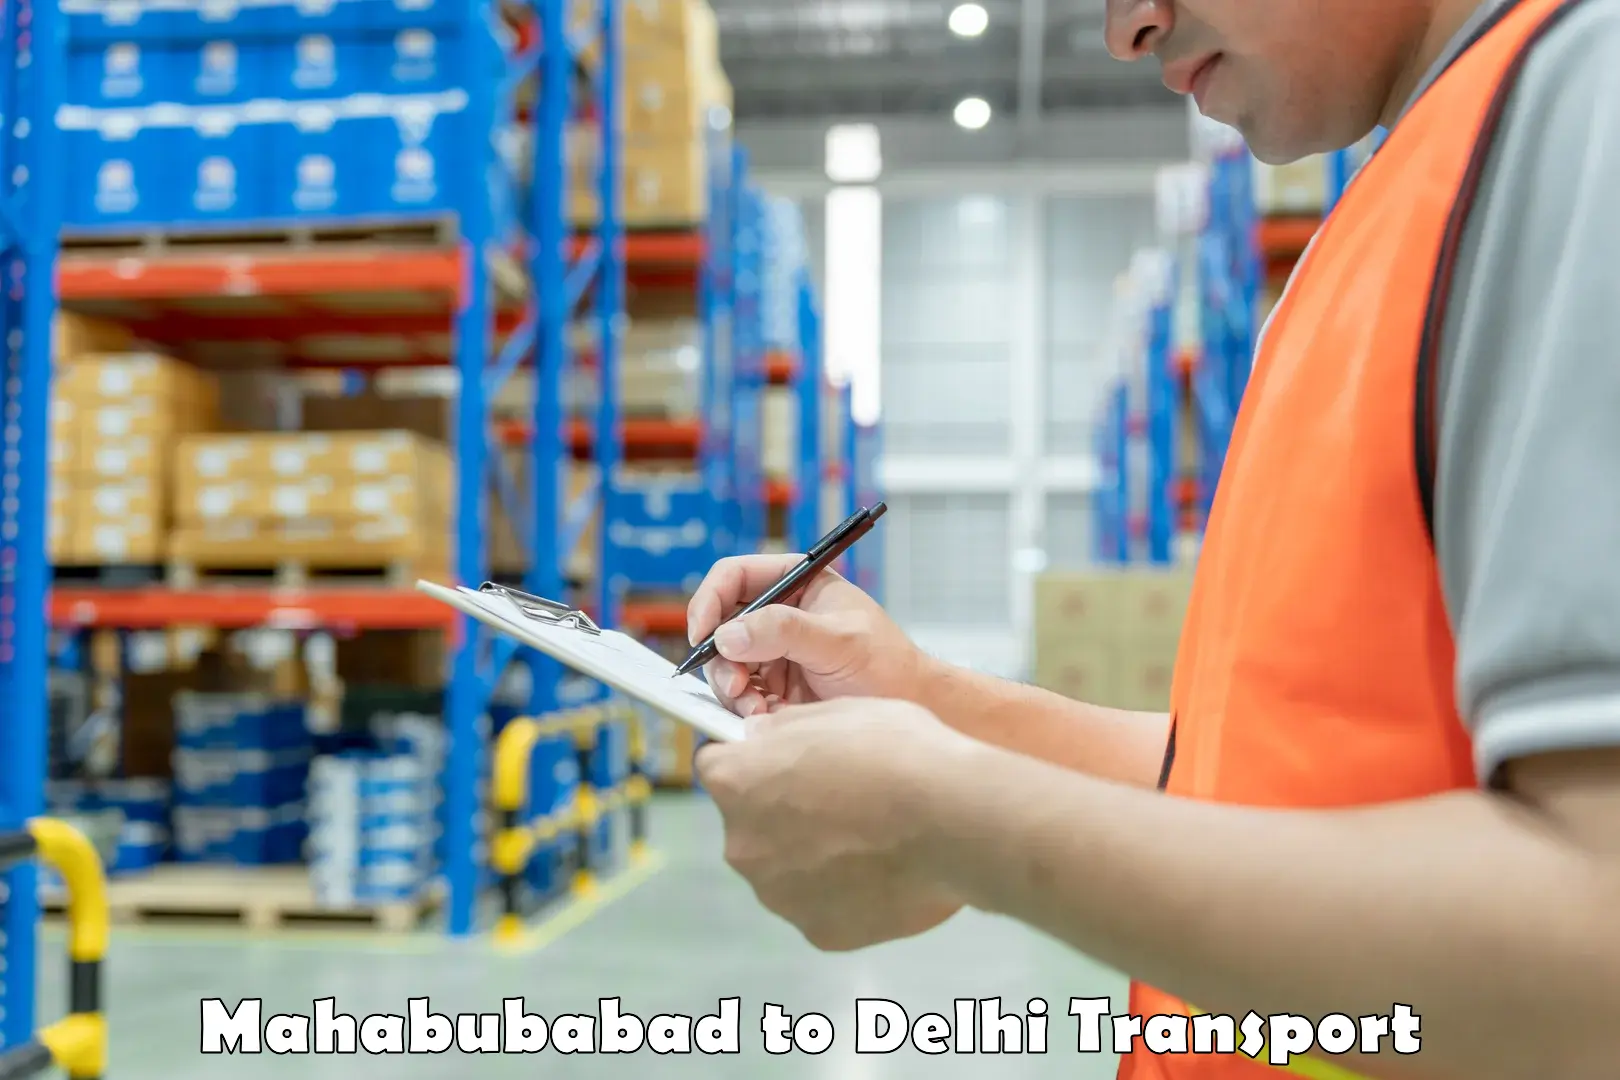 Container transport service Mahabubabad to East Delhi